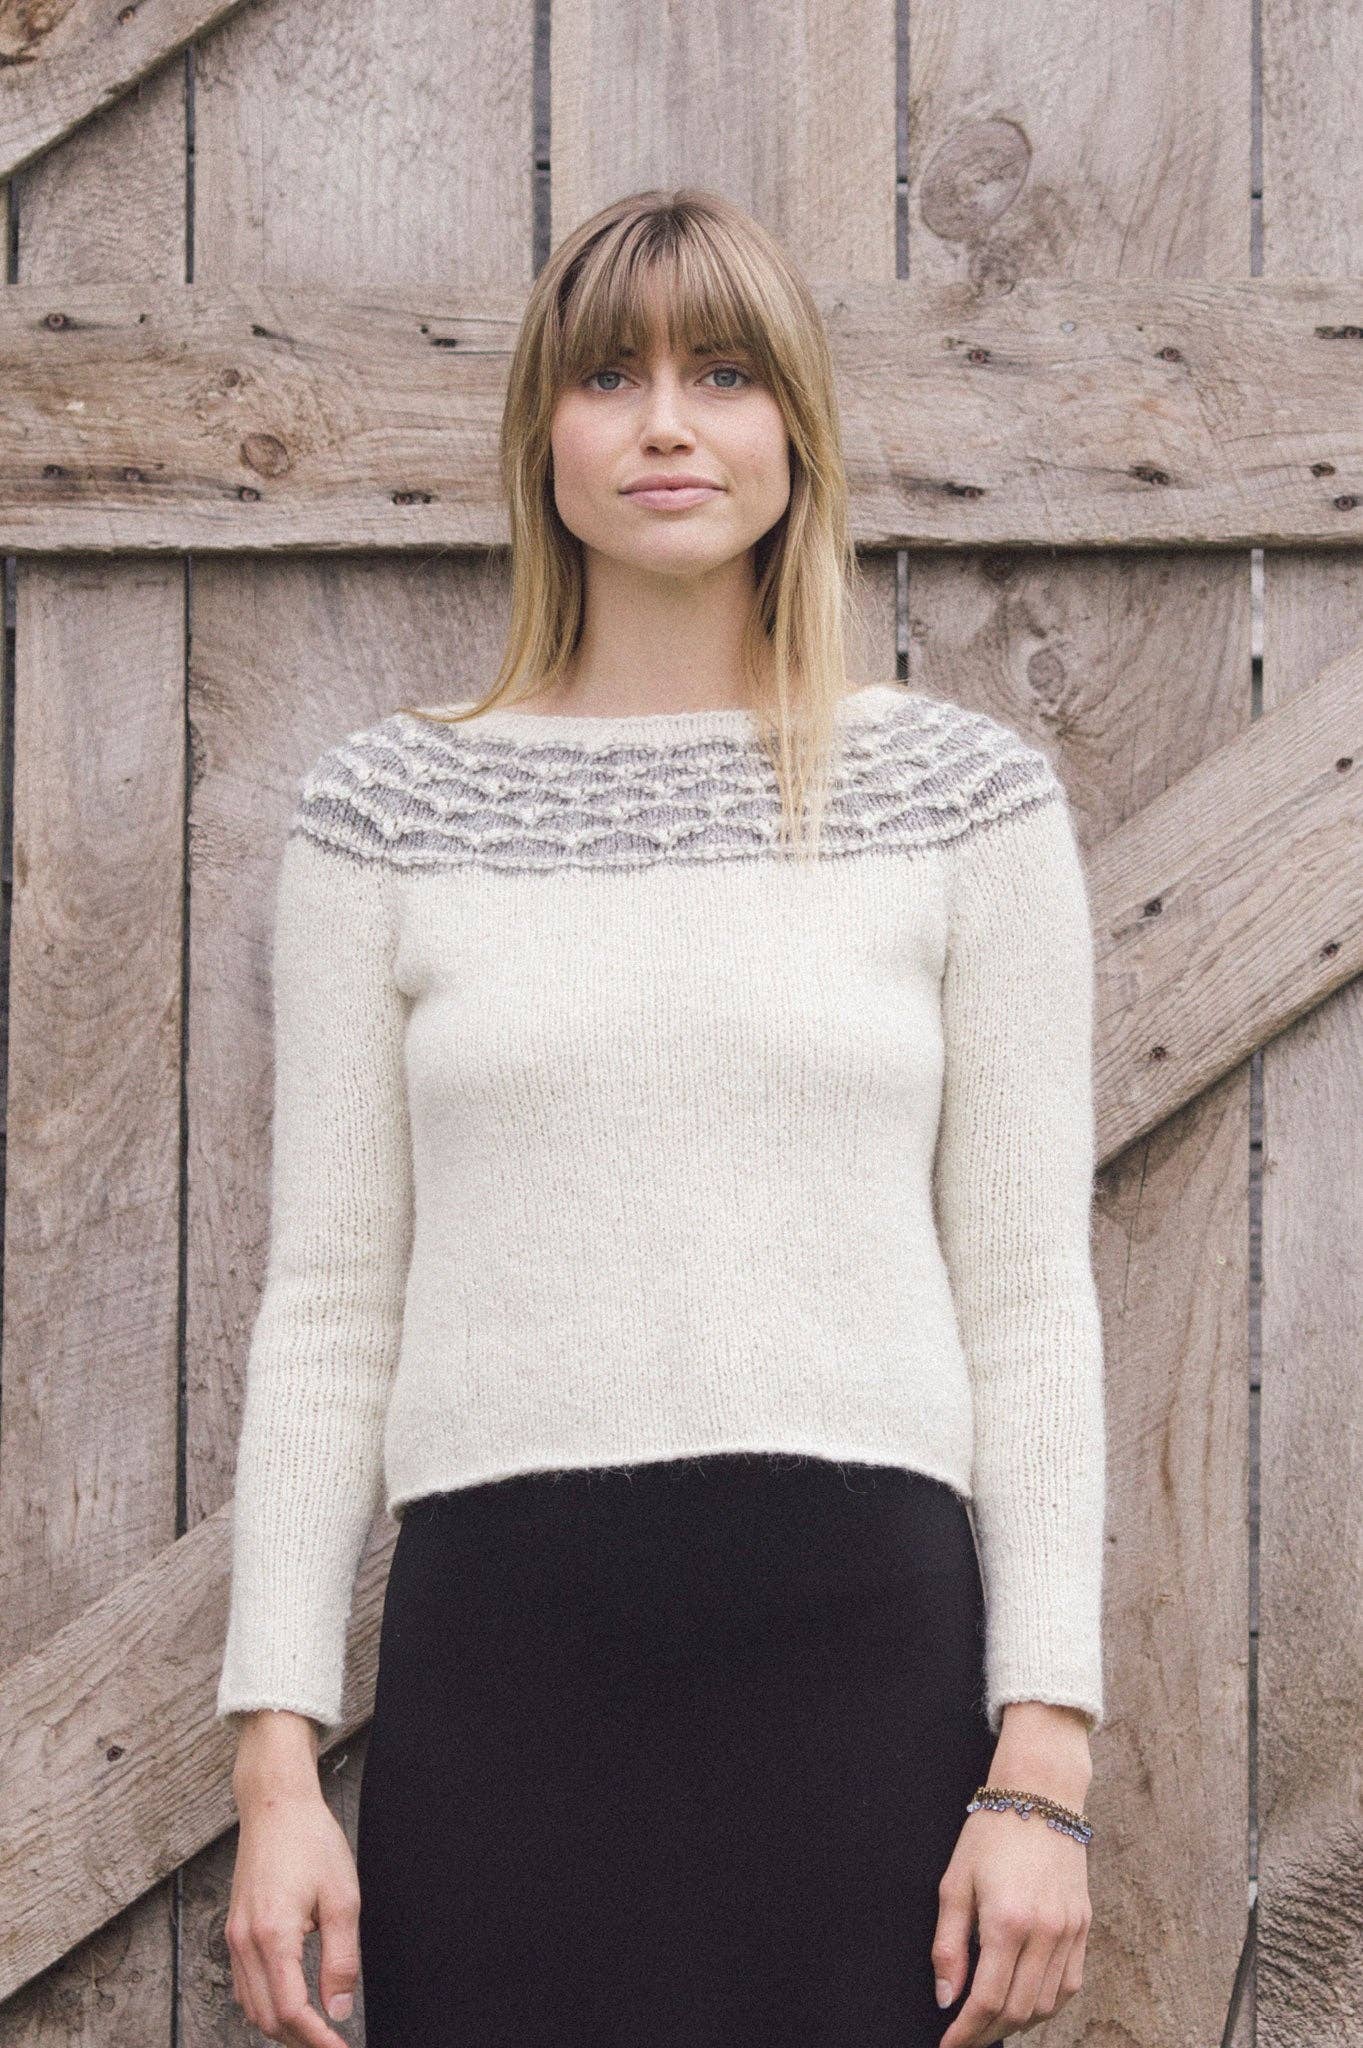 Plain and Simple: 11 Knits to Wear Every Day